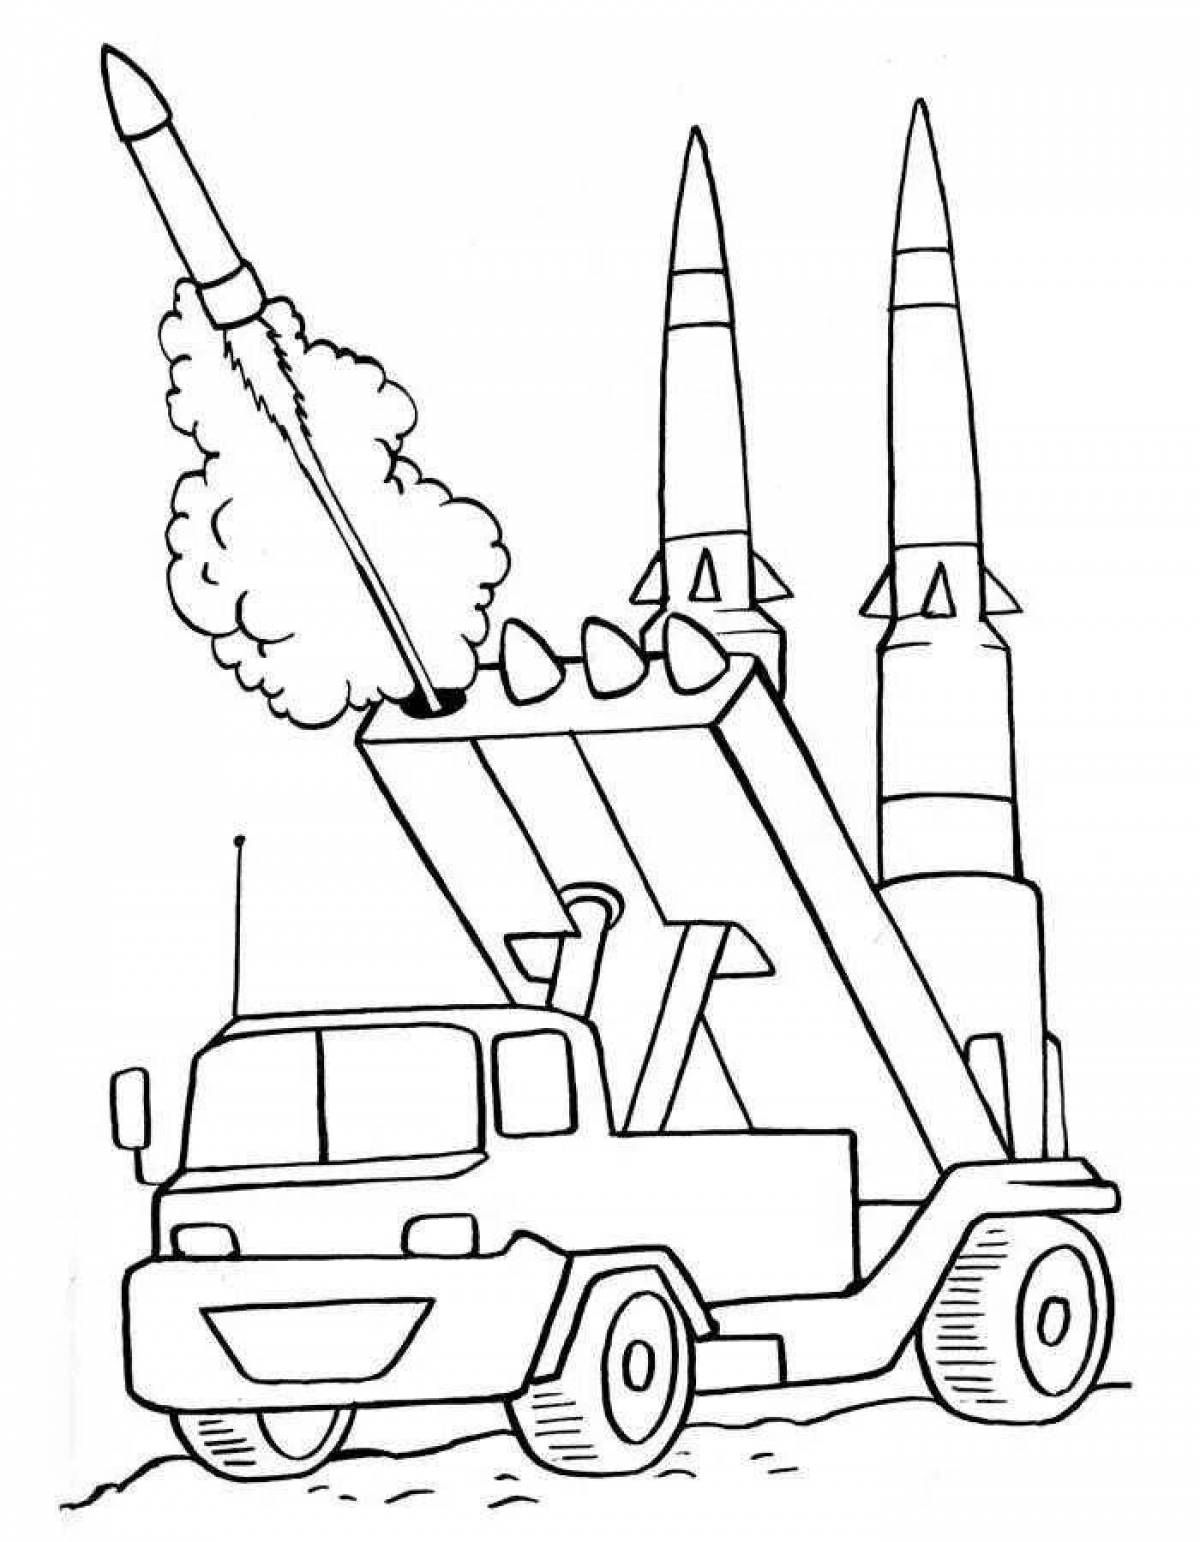 Majestic rocket launcher coloring page